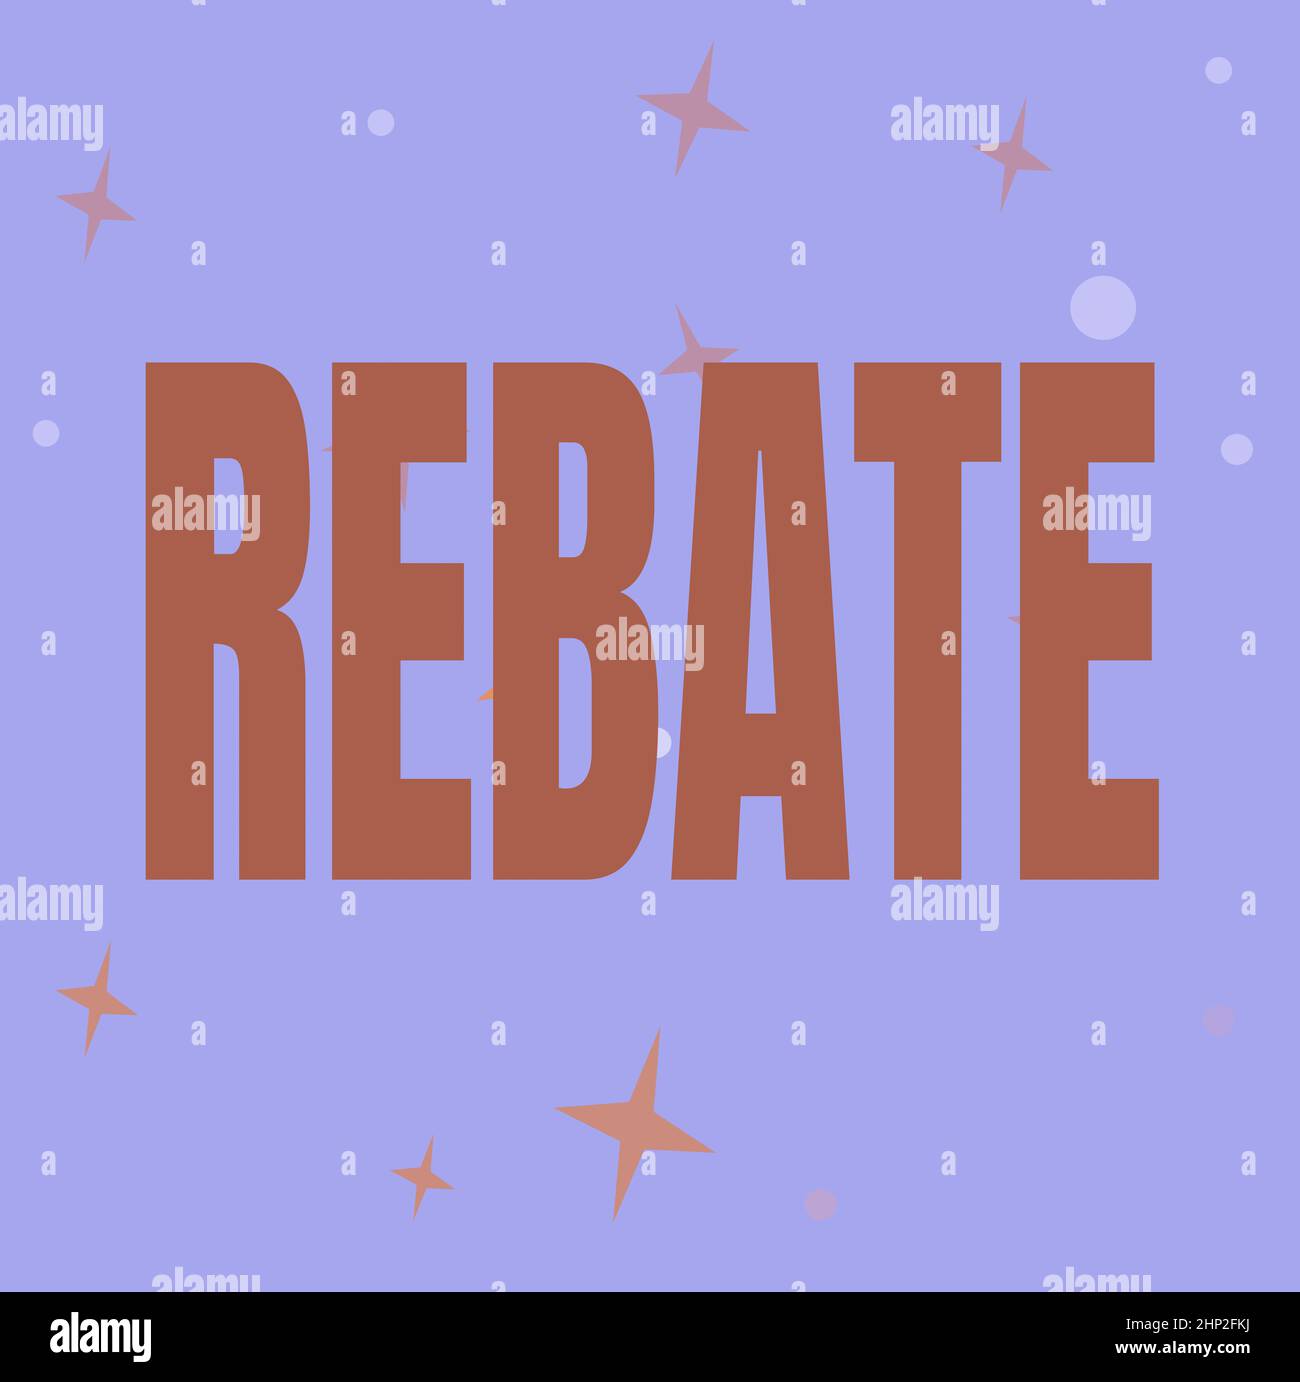 text-sign-showing-rebate-word-for-huge-rewards-that-can-get-when-you